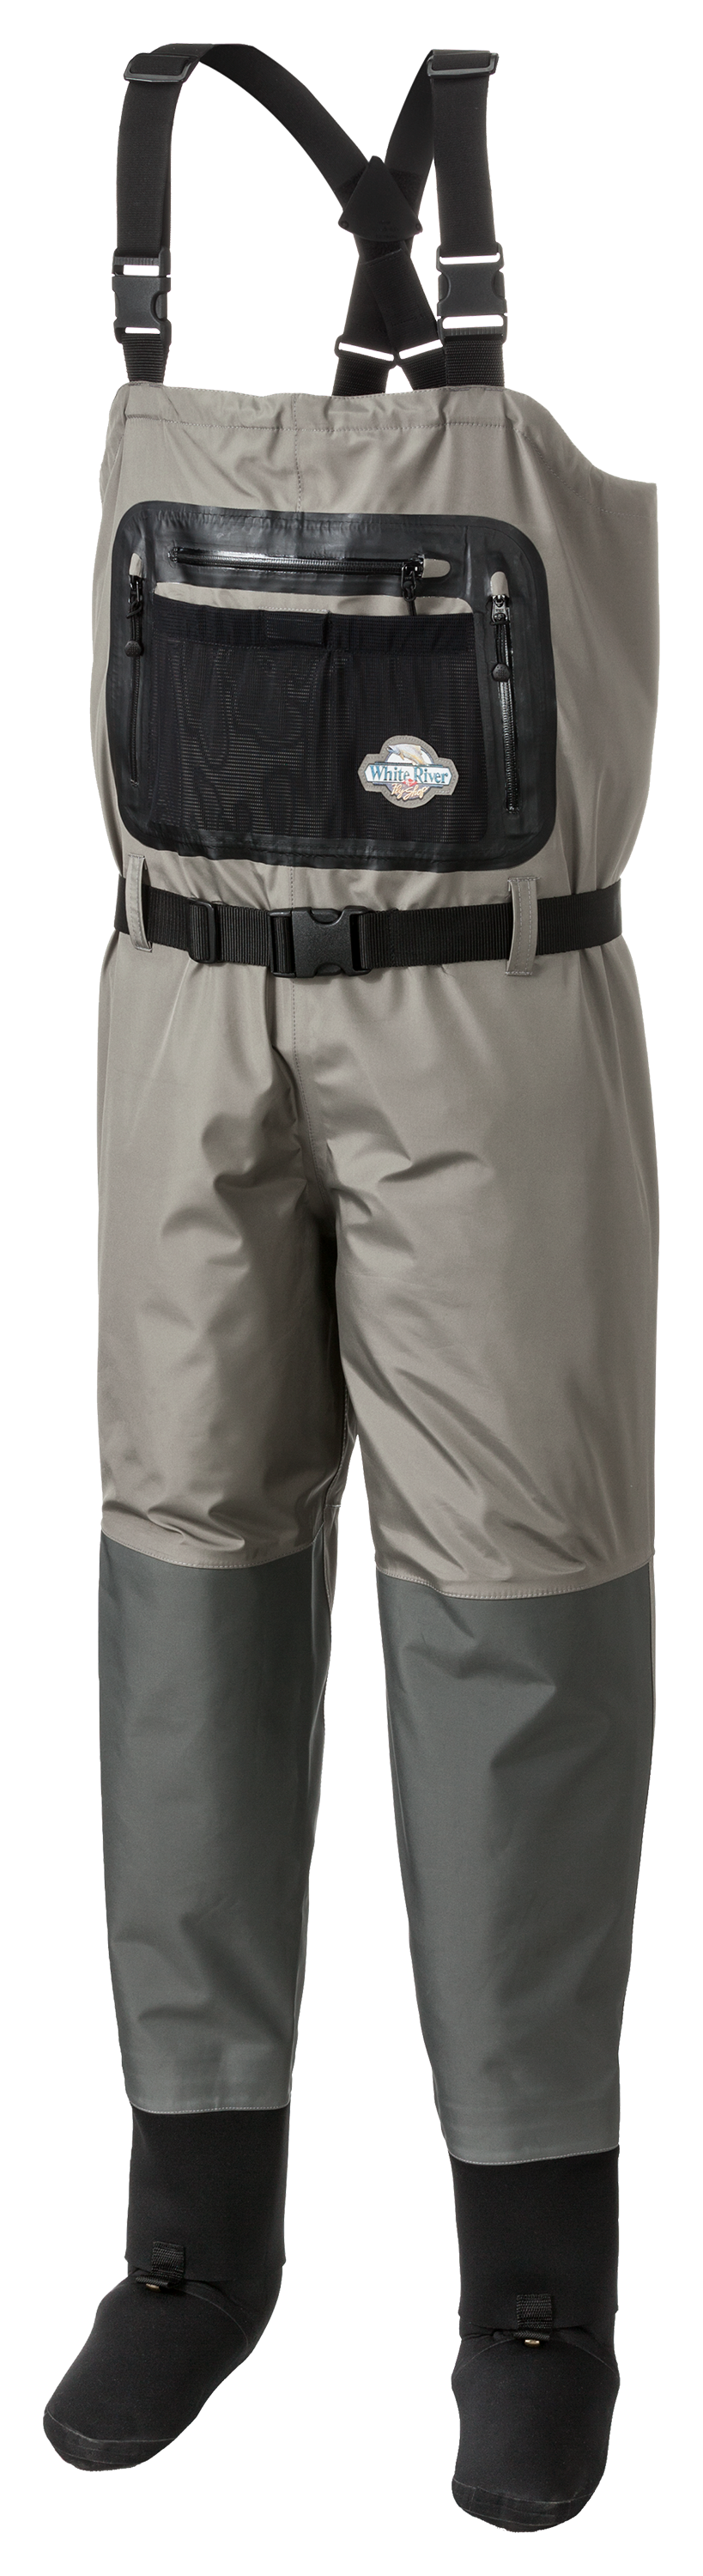 White River Fly Shop Osprey Stocking-Foot Breathable Waders for